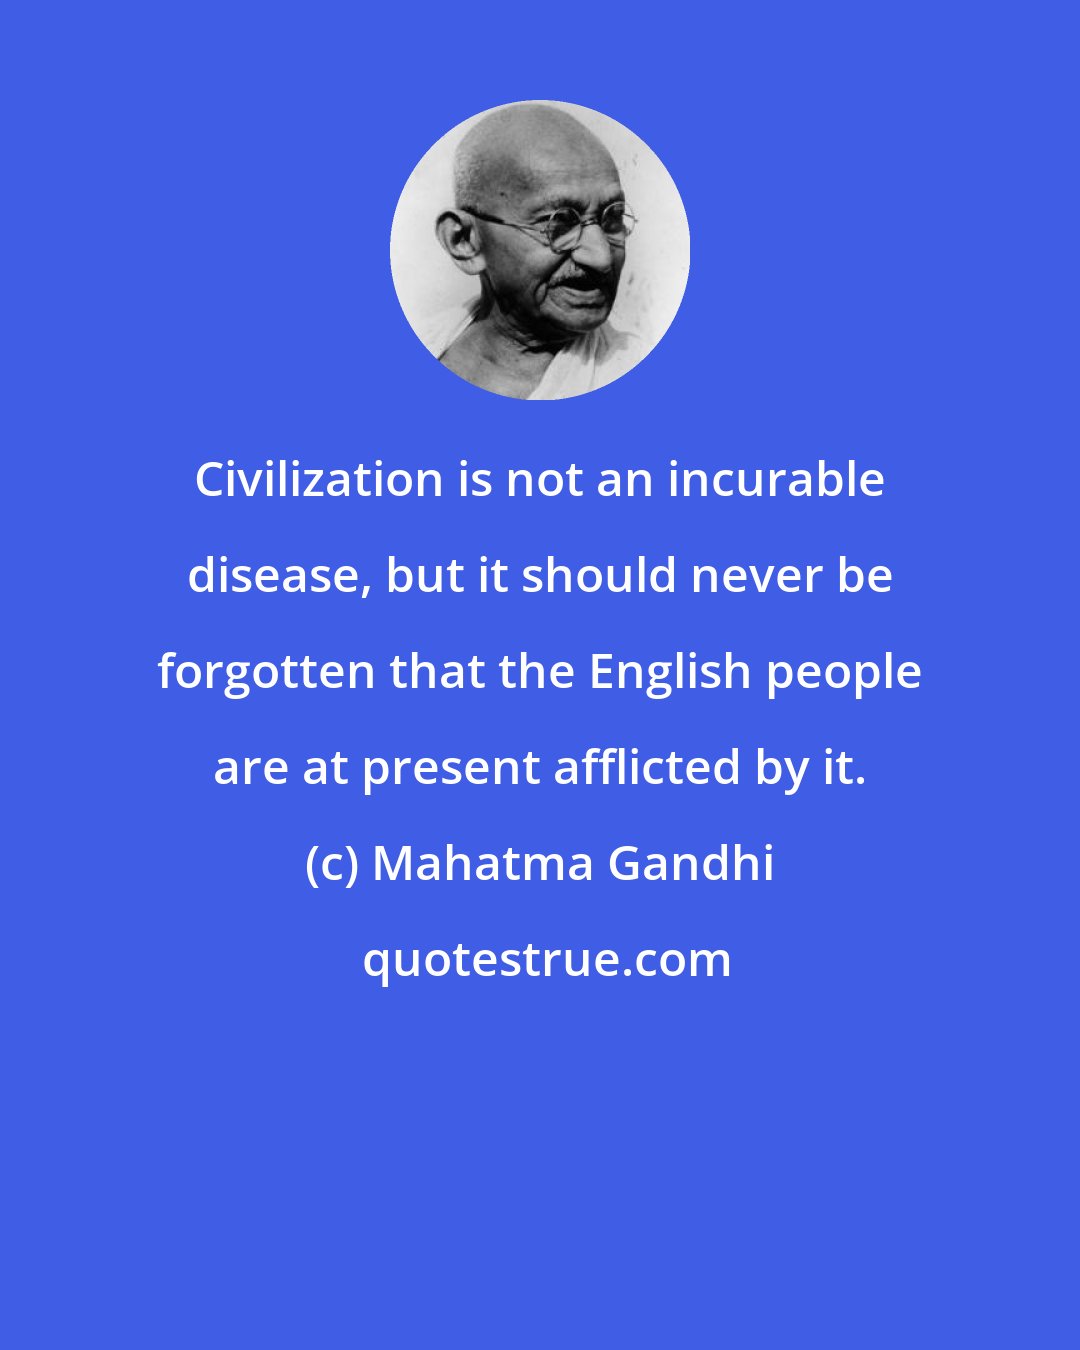 Mahatma Gandhi: Civilization is not an incurable disease, but it should never be forgotten that the English people are at present afflicted by it.